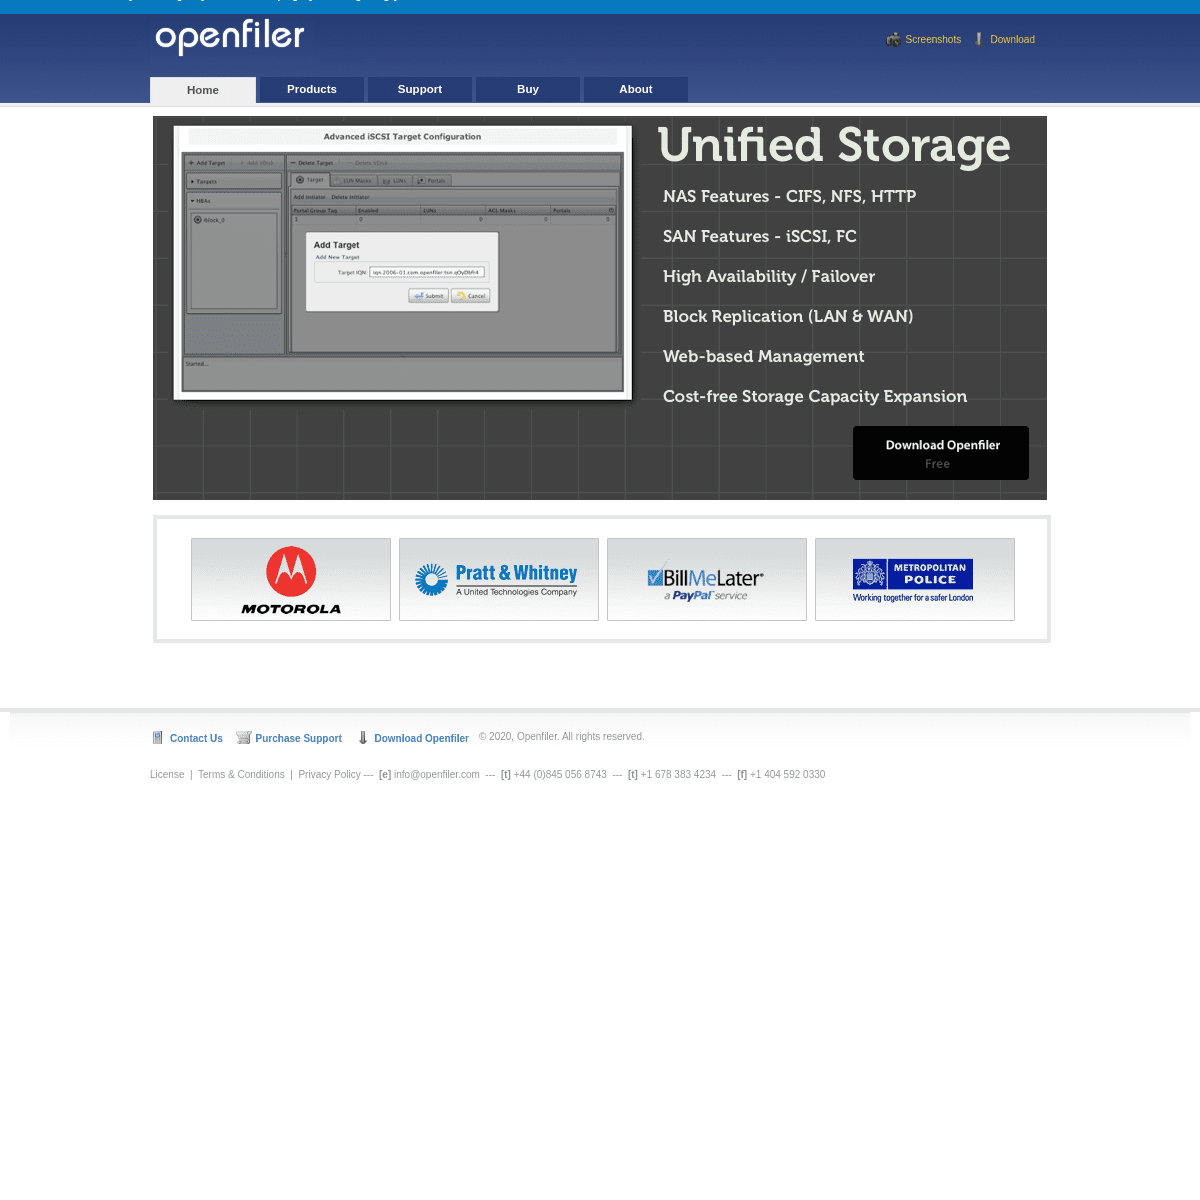 A complete backup of https://openfiler.com